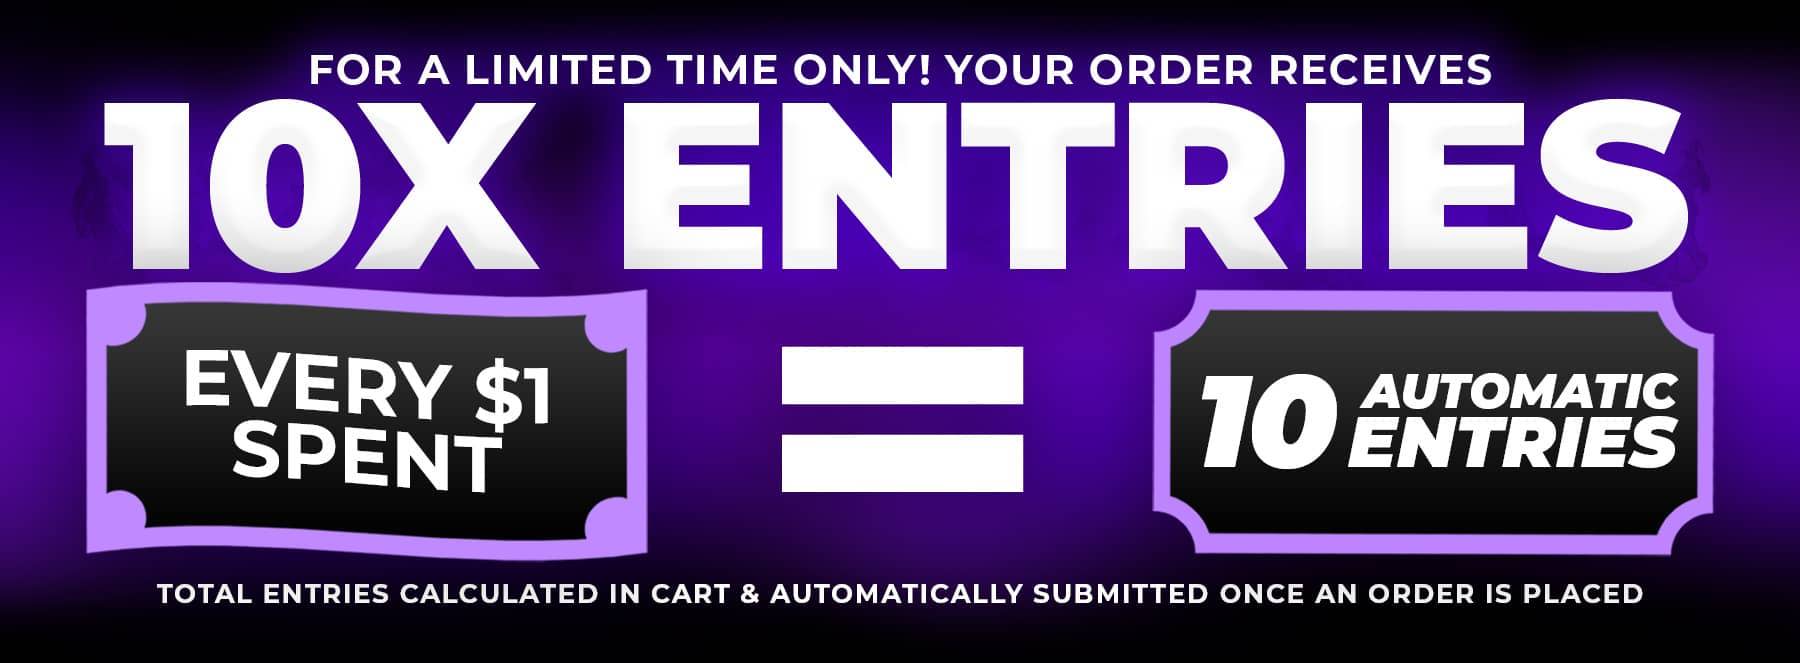 20X ENTRIES ARE LIVE NOW!  EVERY $1 YOU SPEND GETS YOU 20 ENTRIES TO WIN LGND31!!